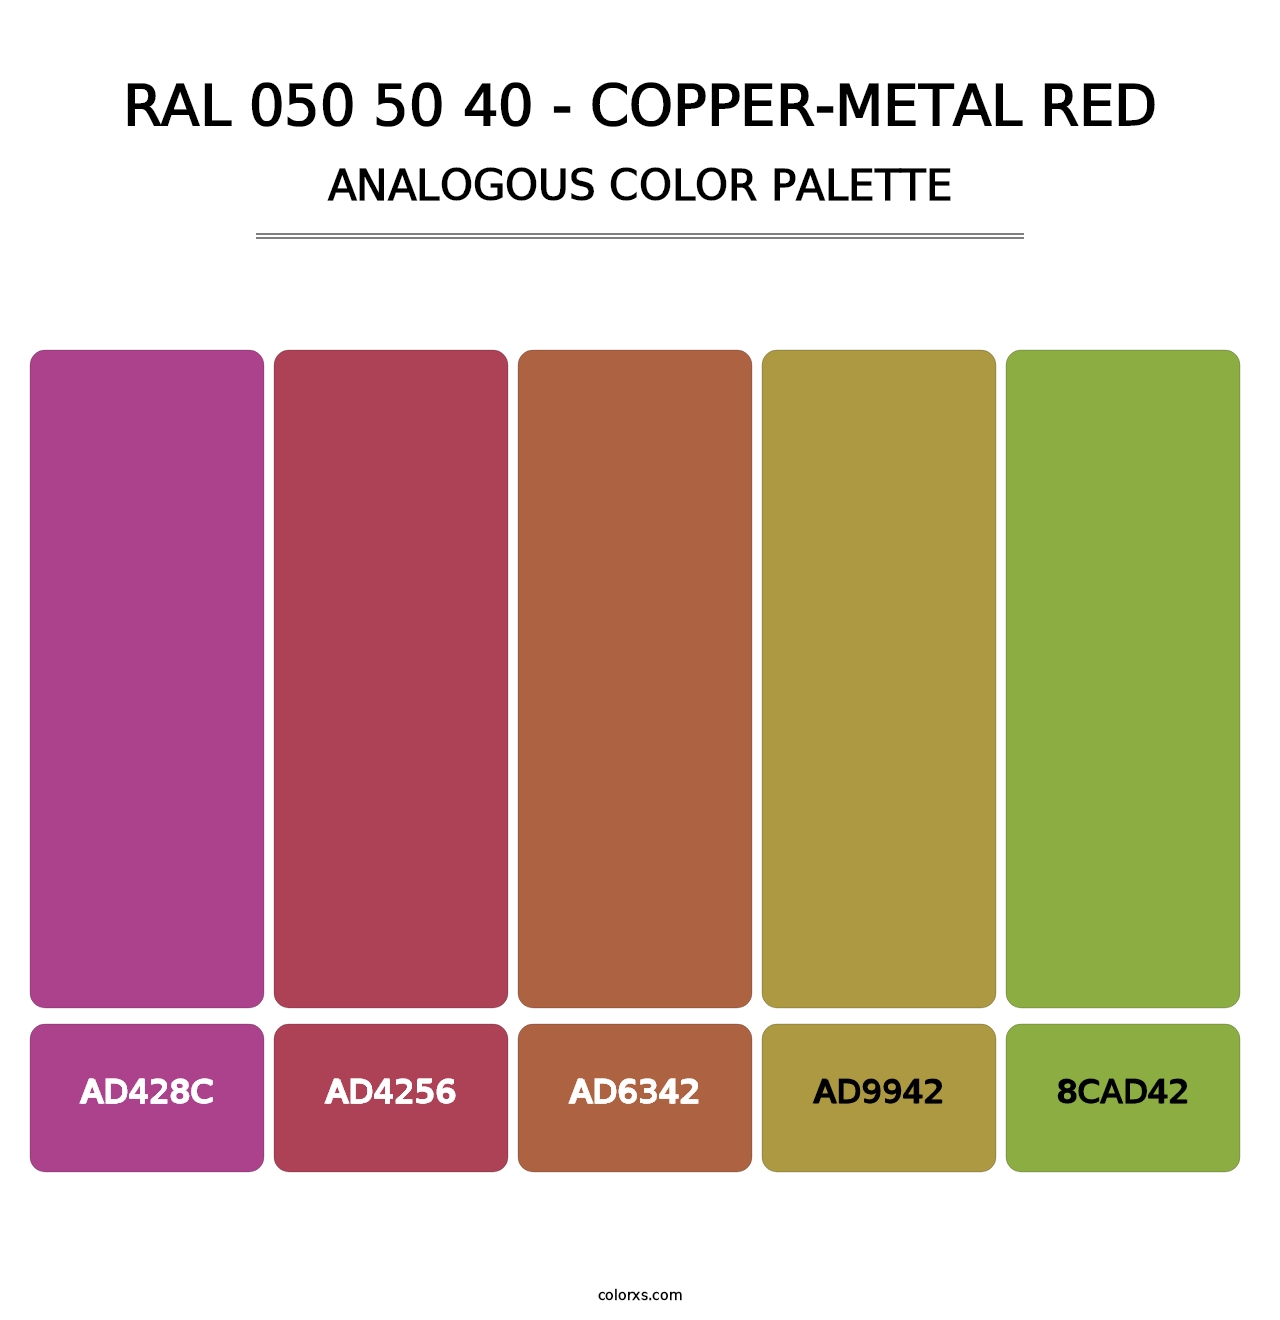 RAL 050 50 40 - Copper-Metal Red - Analogous Color Palette